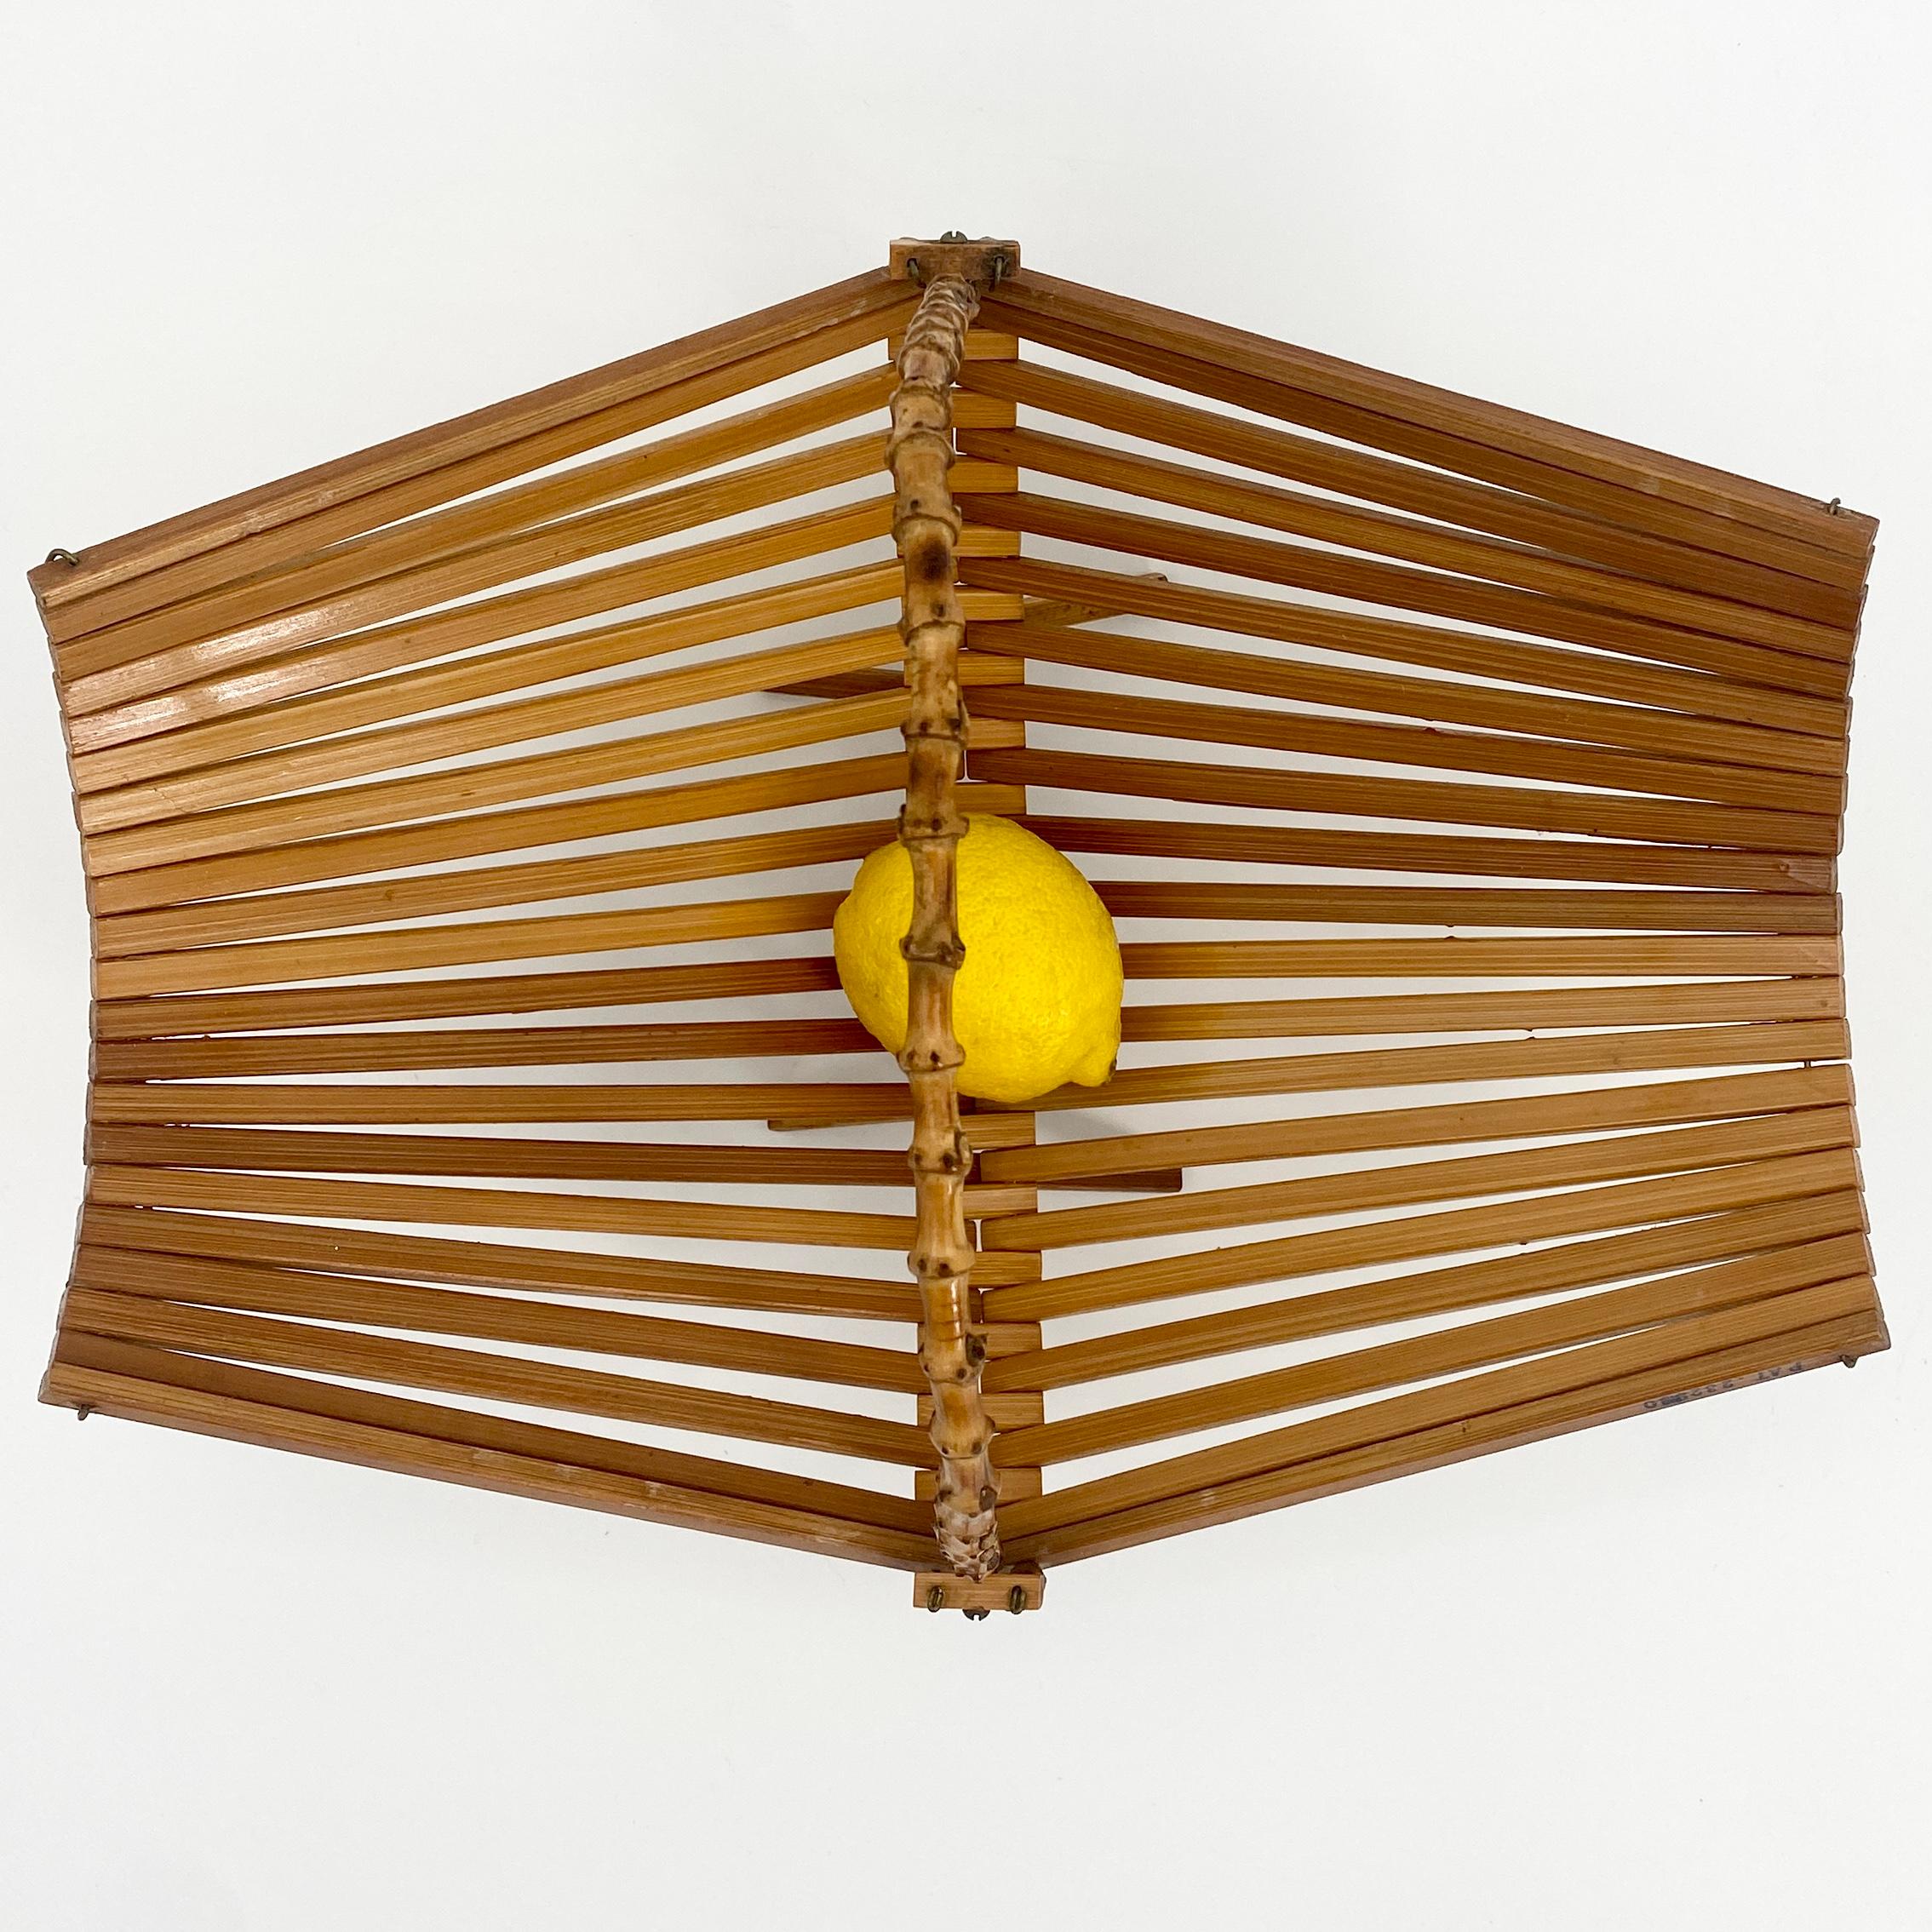 Architectural Bread or Fruit Kitchen Basket with Bamboo Handle, Denmark 9